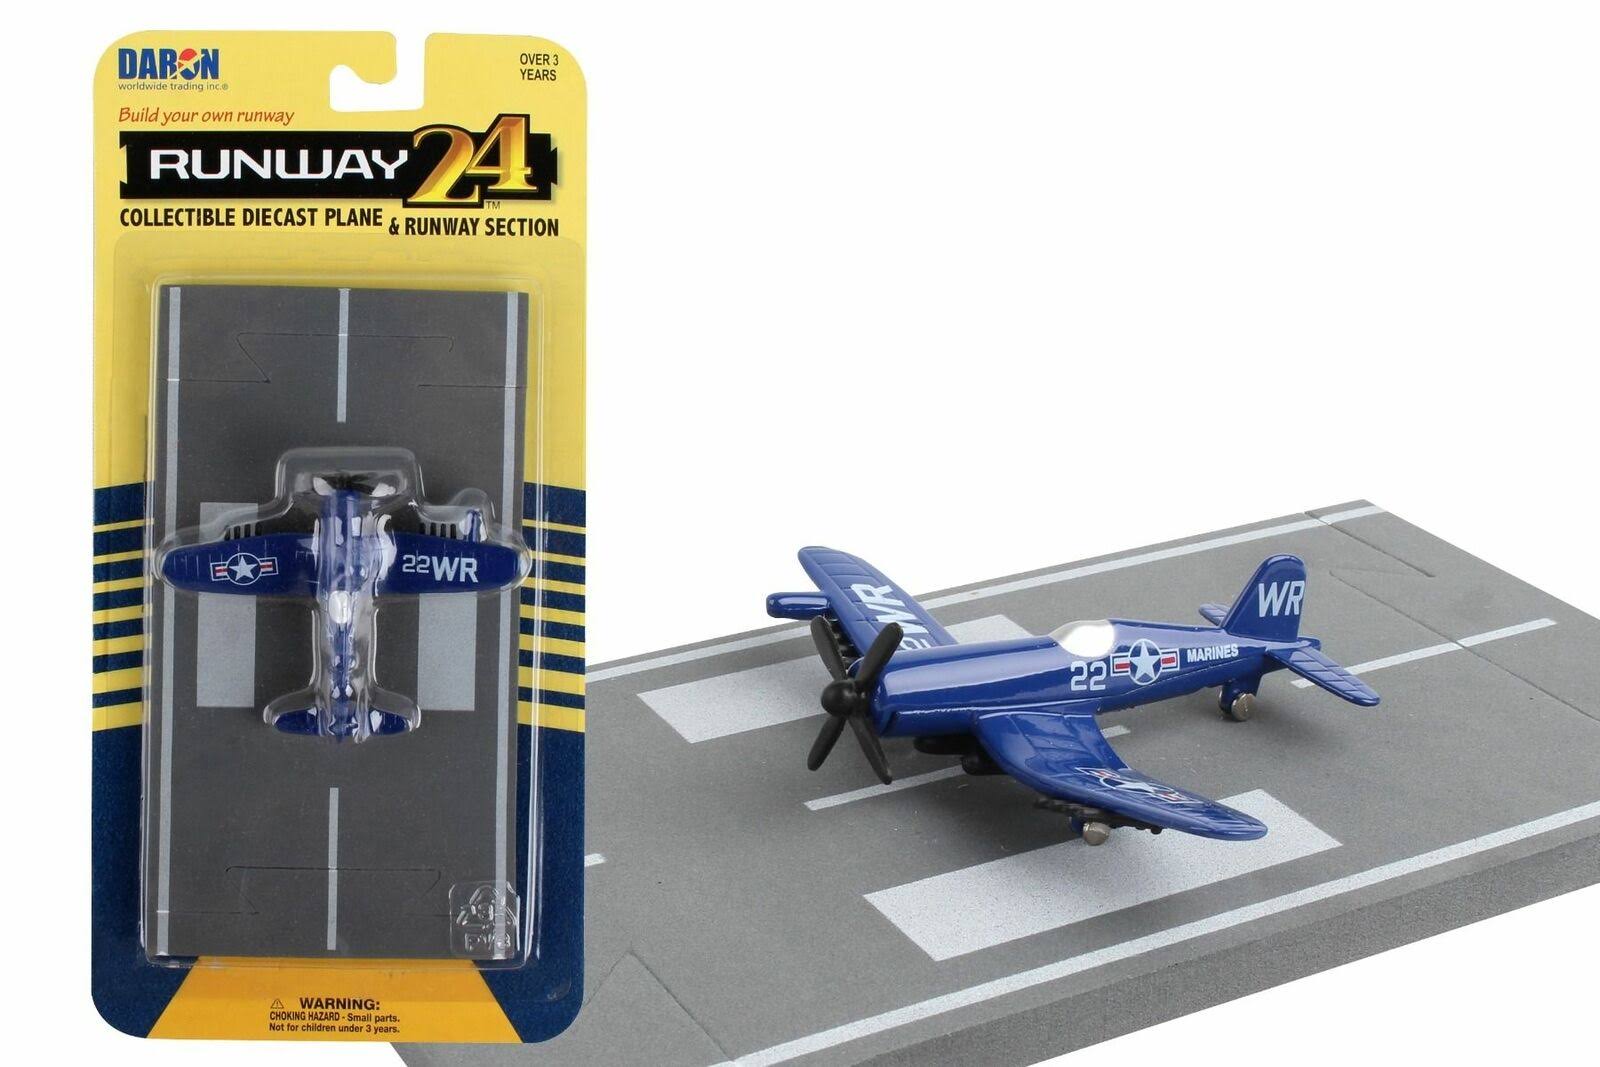 Daron Runway24 Diecast Metal Toy with Runway Section Coast Guard Helicopter 